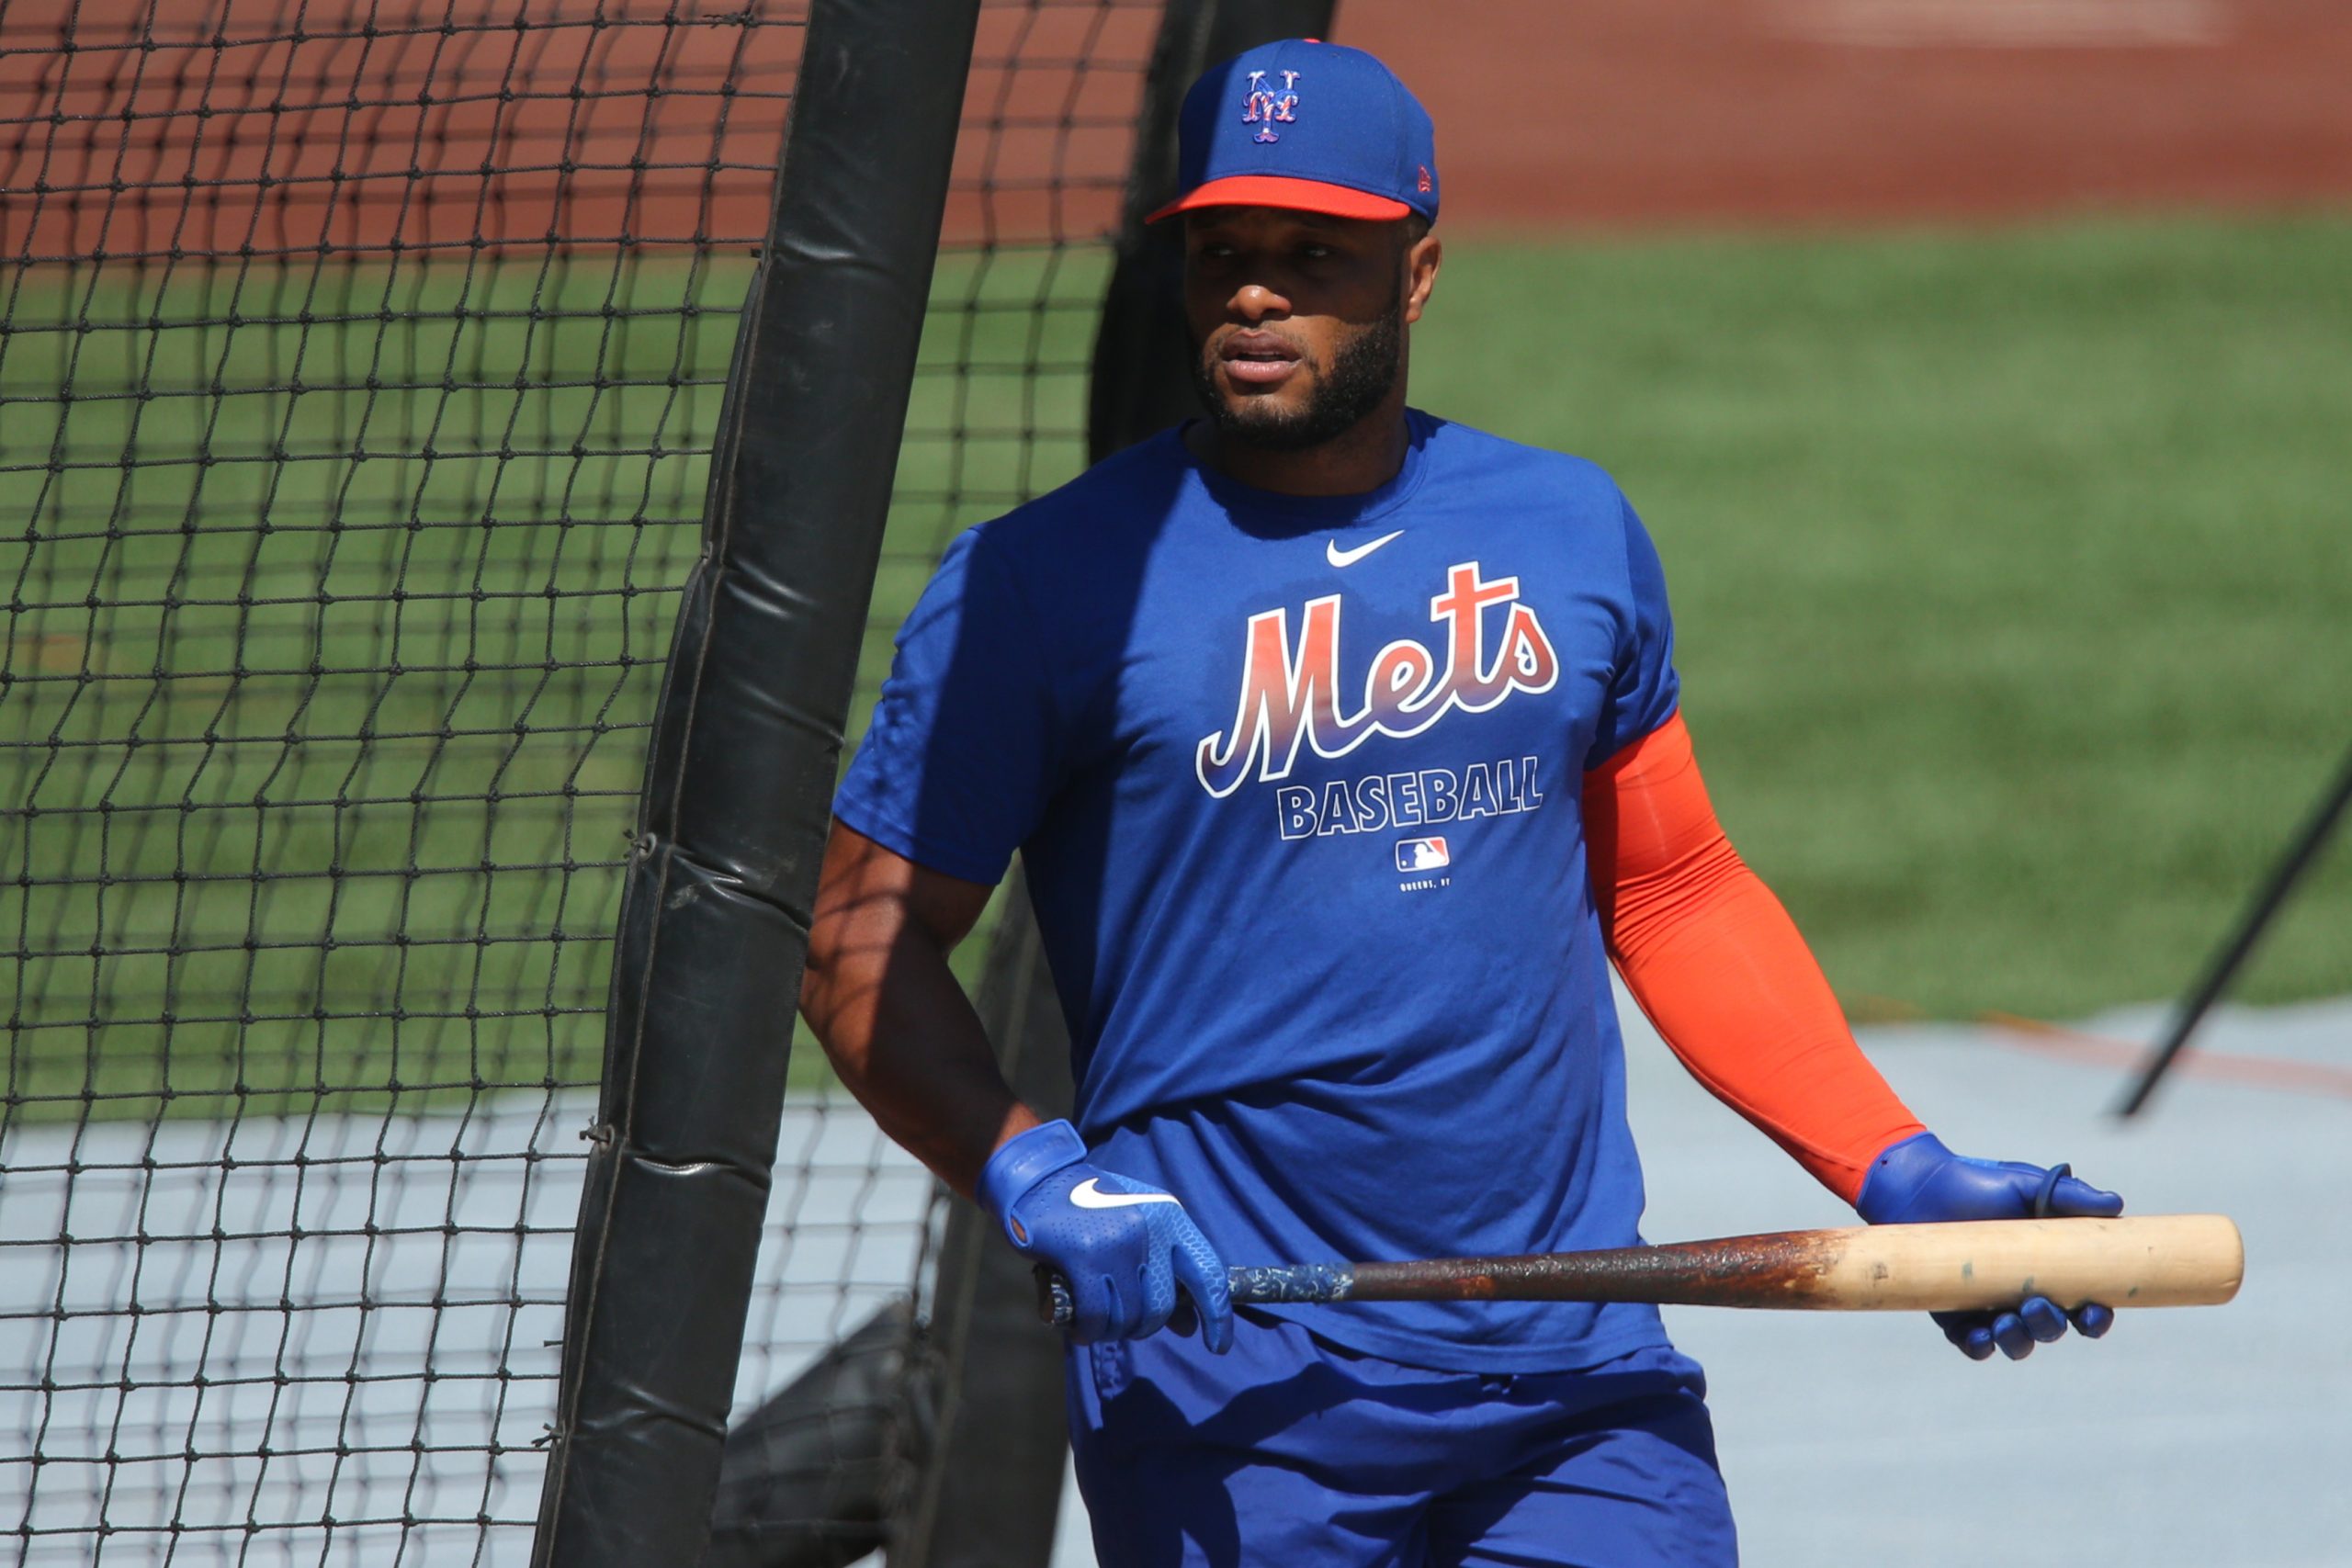 Mets' Robinson Cano batting third in exhibition games should be no